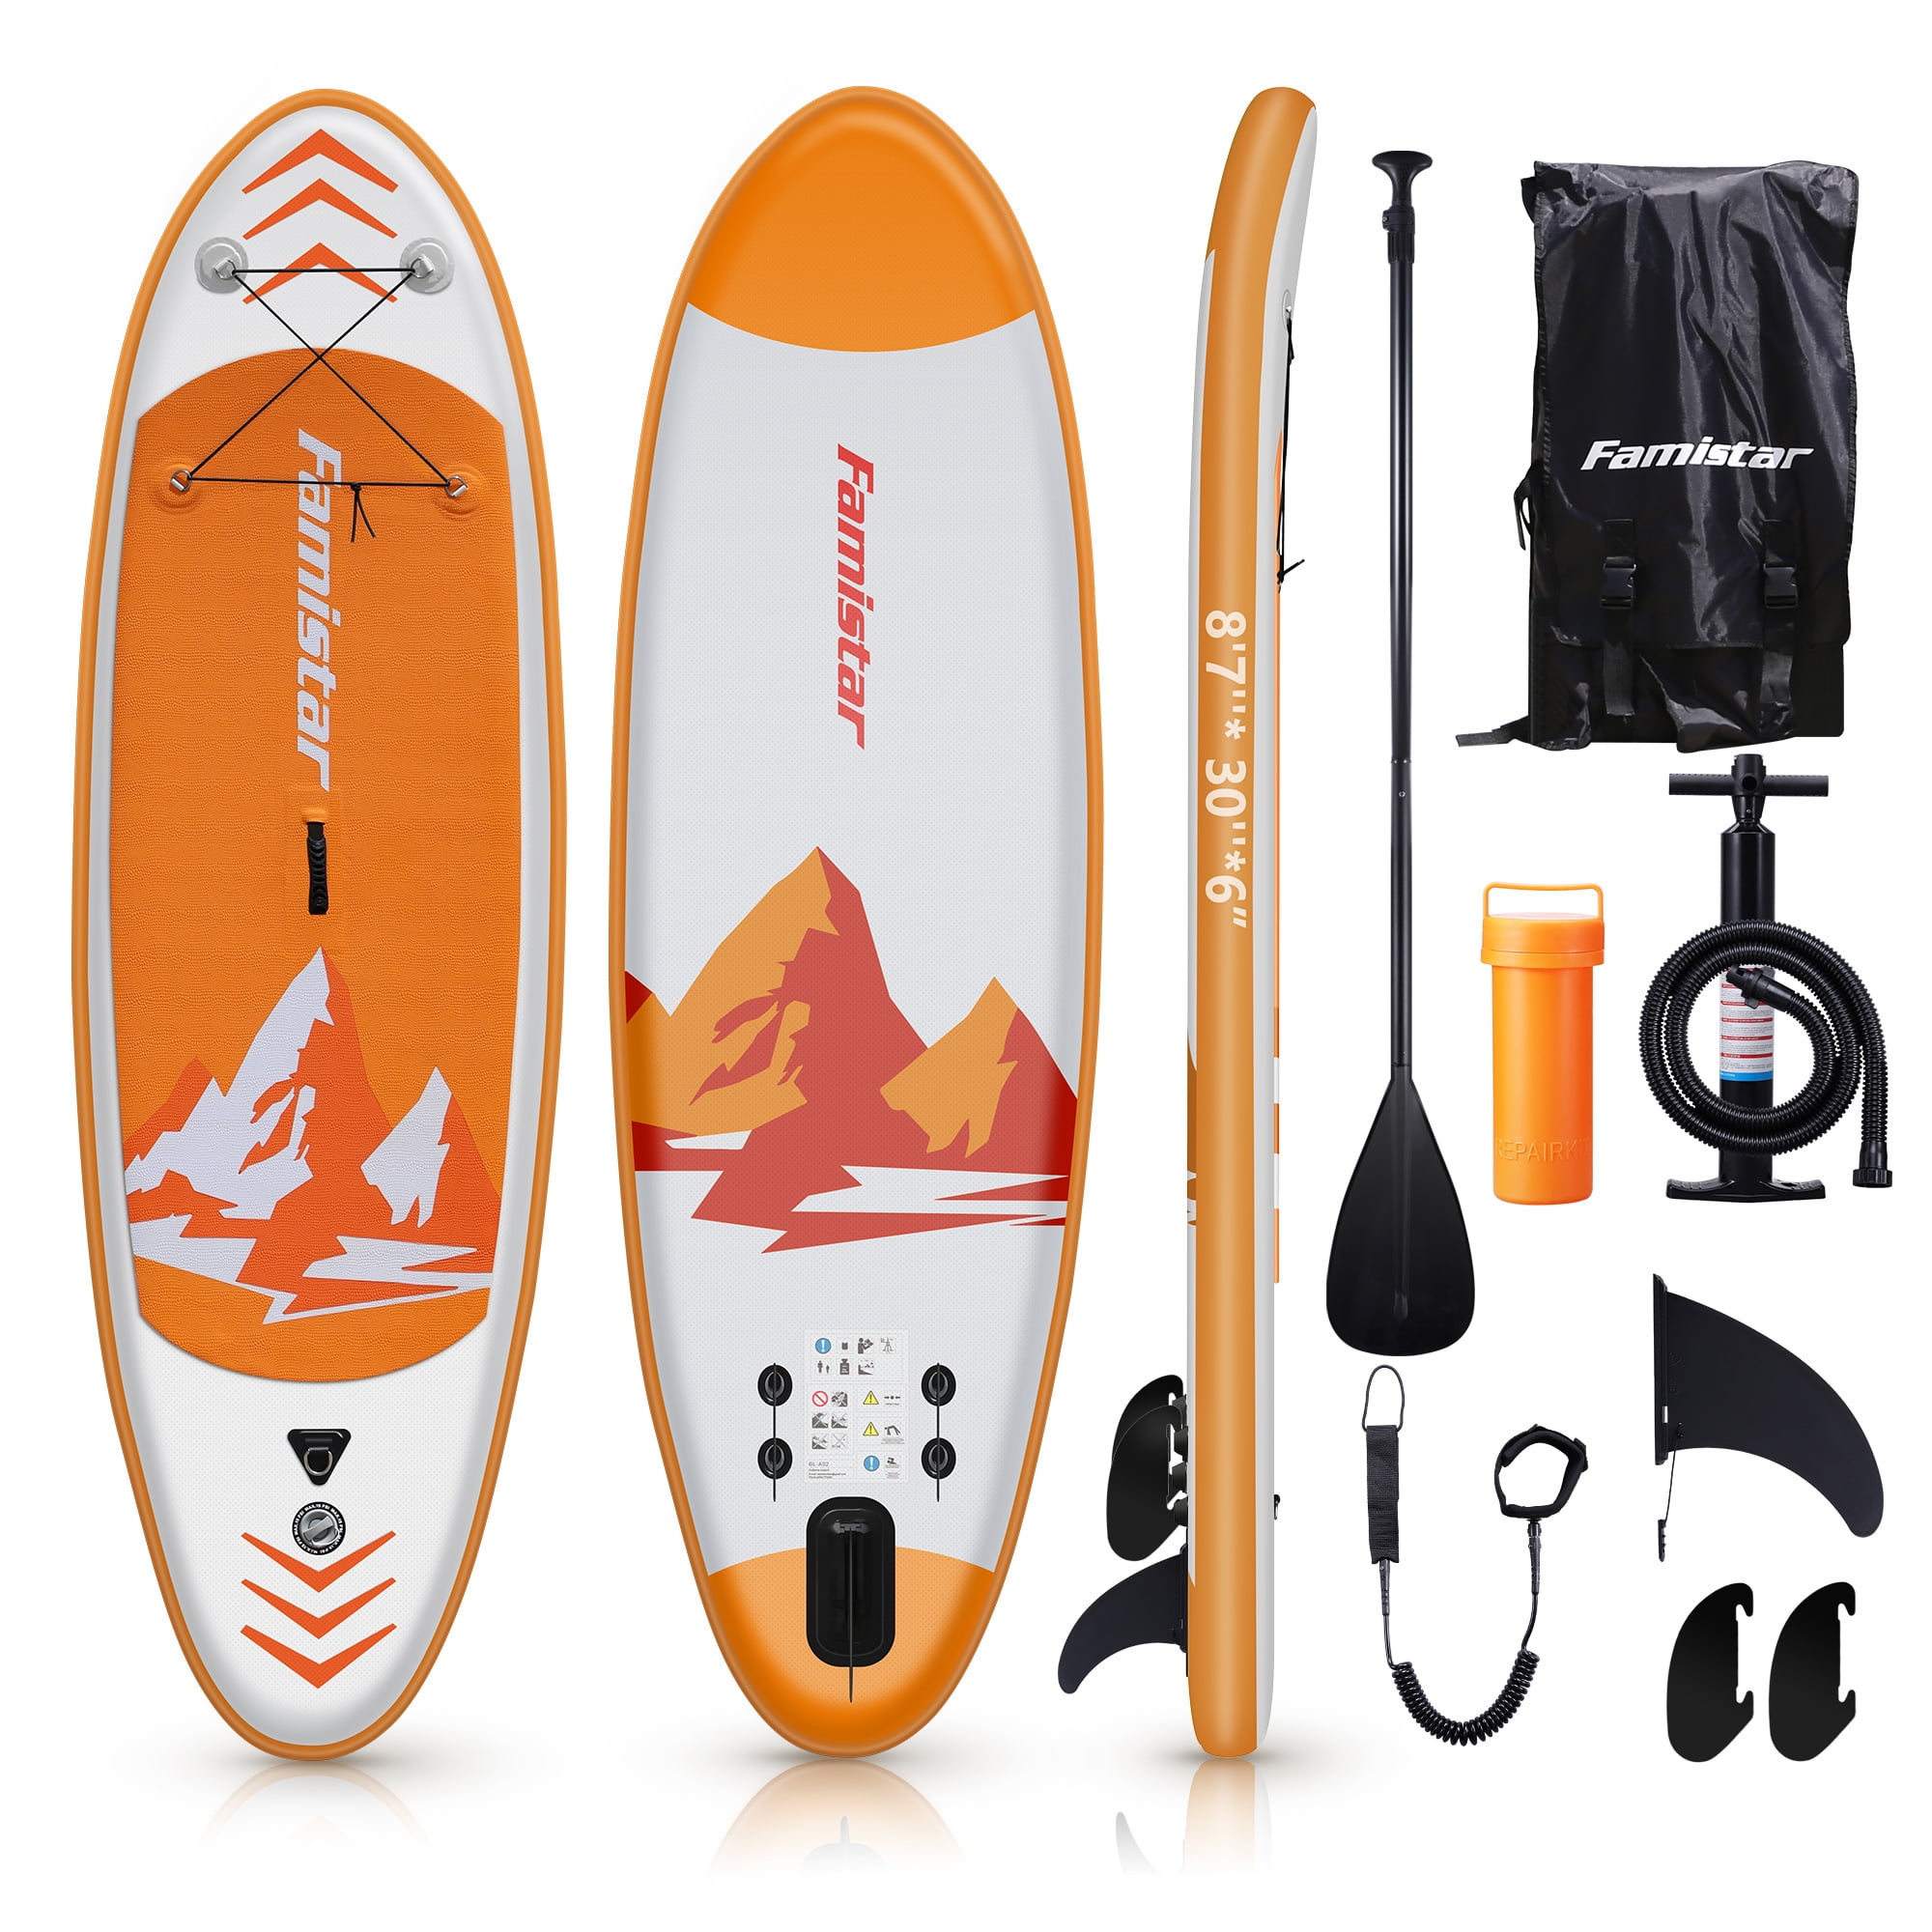 Riber Orange with Accessories 9.5ft iSUP Inflatable Stand Up Paddle Board 